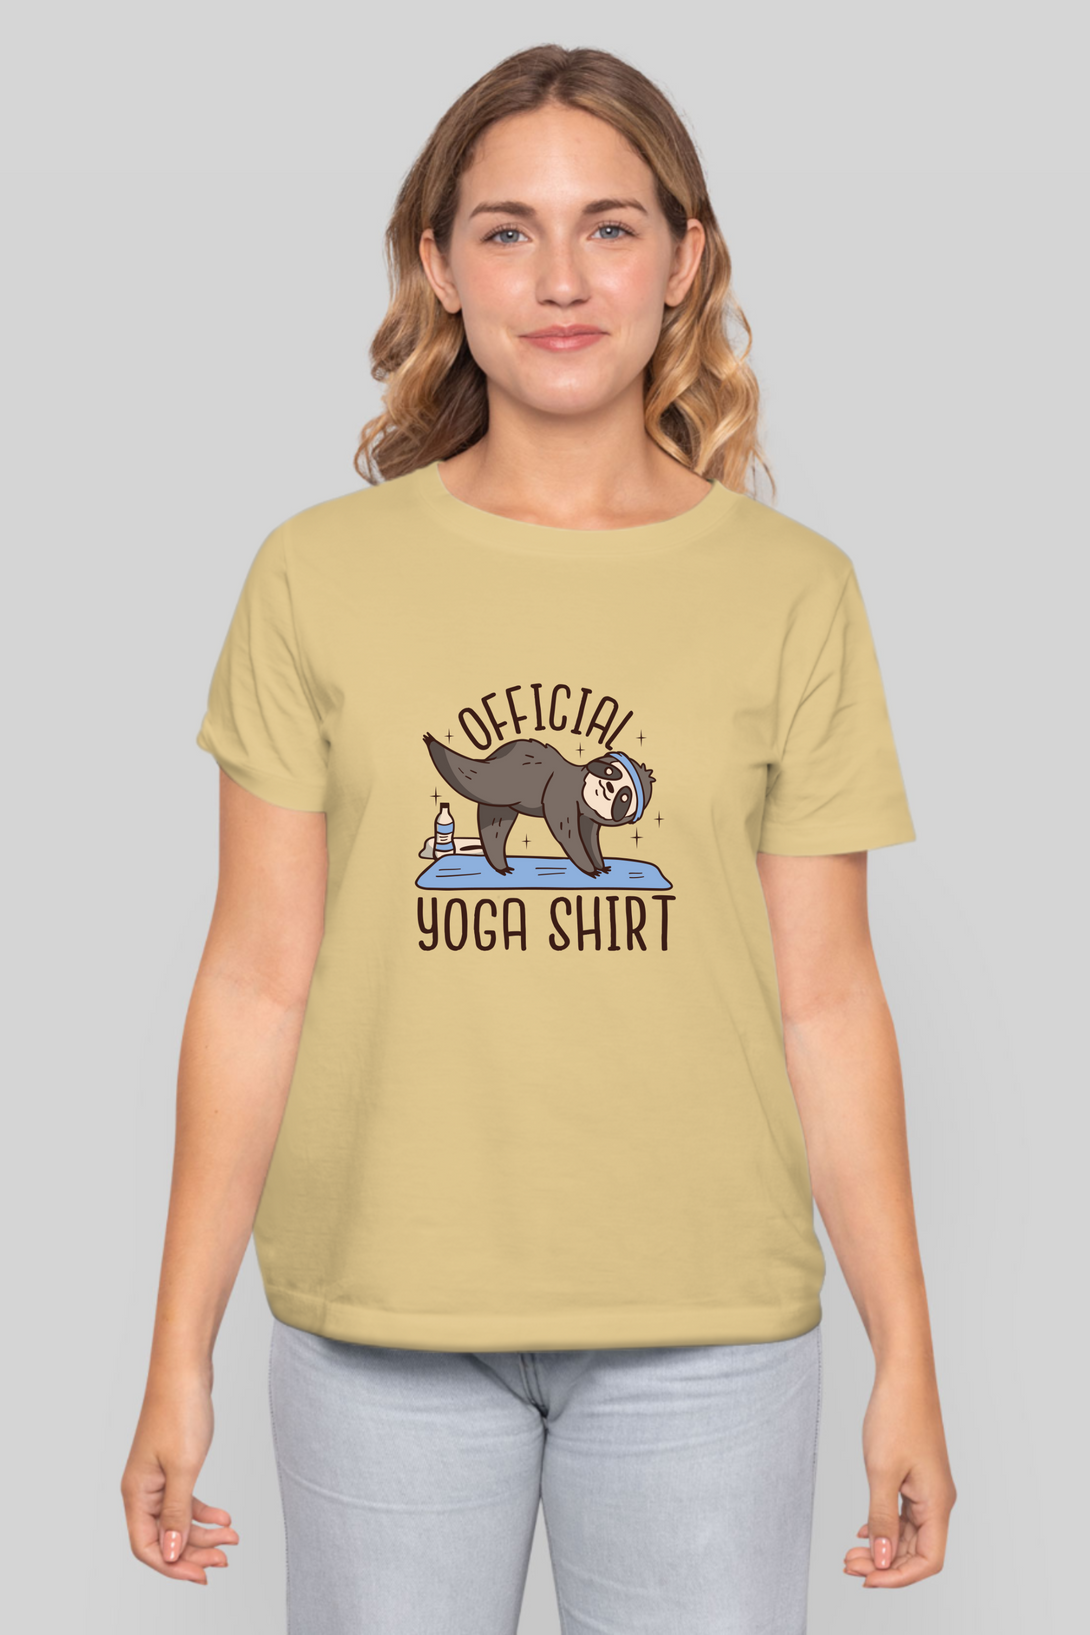 Official Yoga Sloth Printed T-Shirt For Women - WowWaves - 17